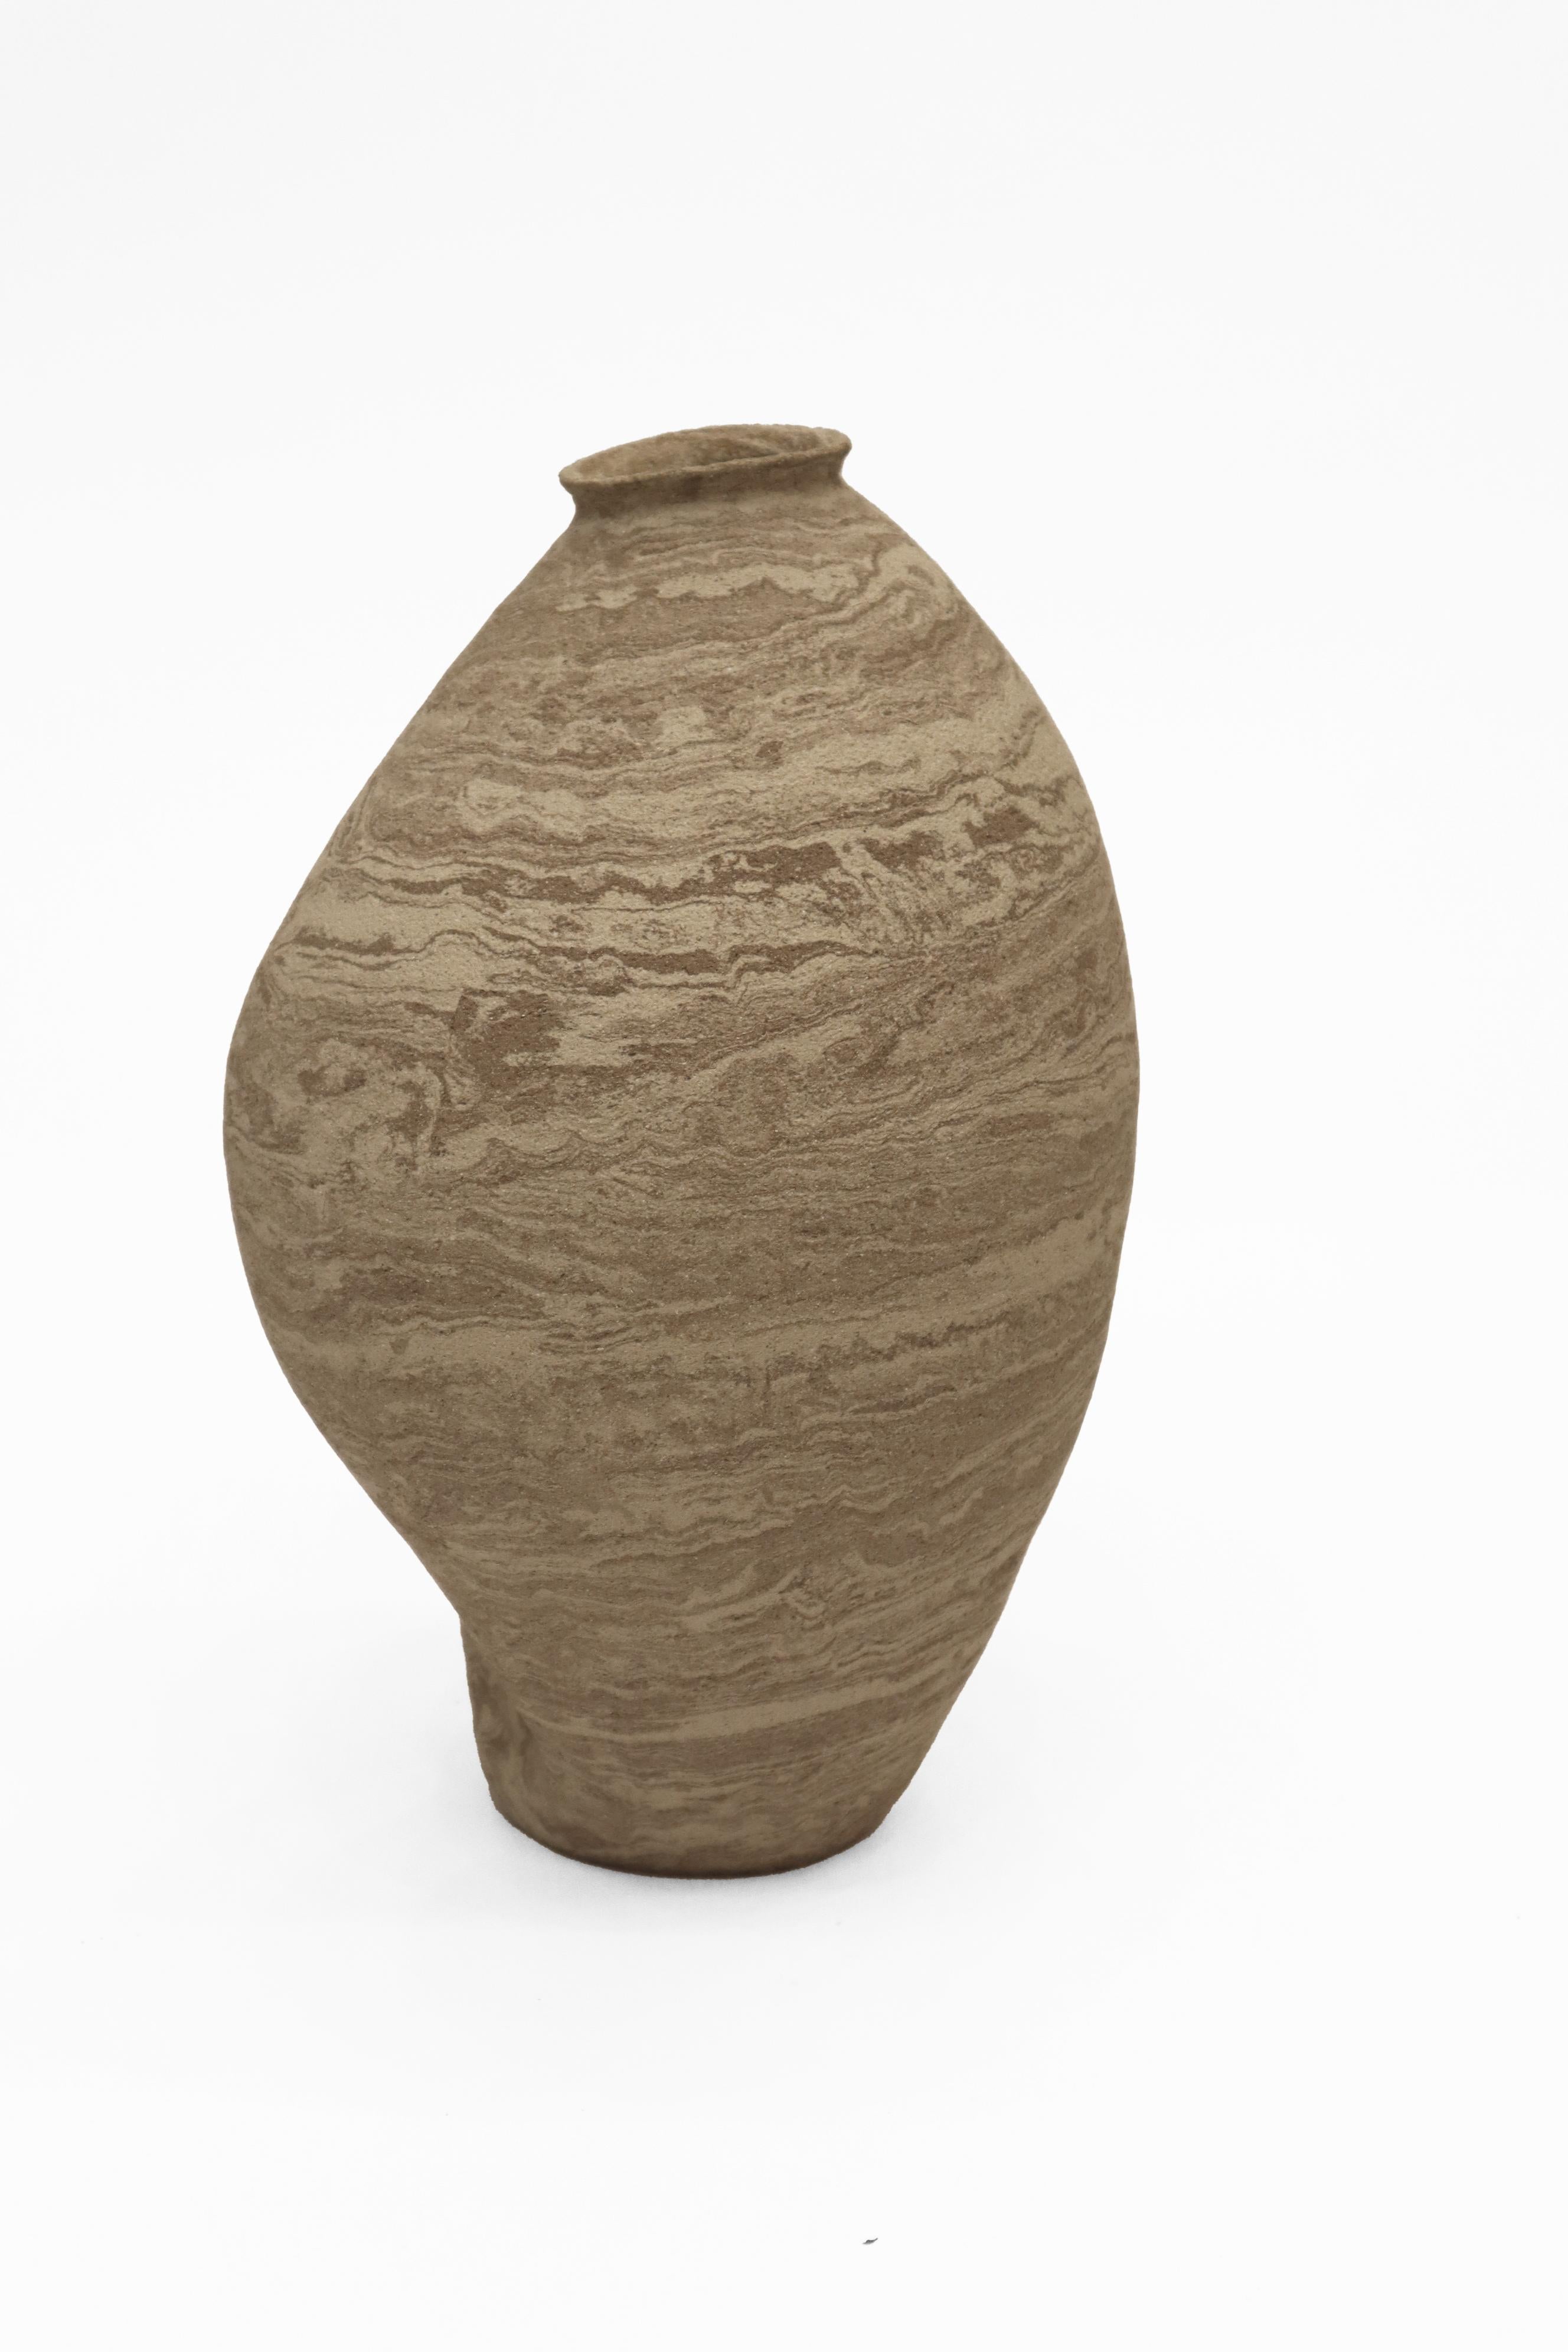 Stomata 10 vase by Anna Karountzou
Dimensions: W 17 x D 14 x H 30 cm
Materials: Mixed beige and white stoneware clay, clear glaze inside, fired at 1240

Born and based in Athens, Greece, with a background in conservation of works of art and